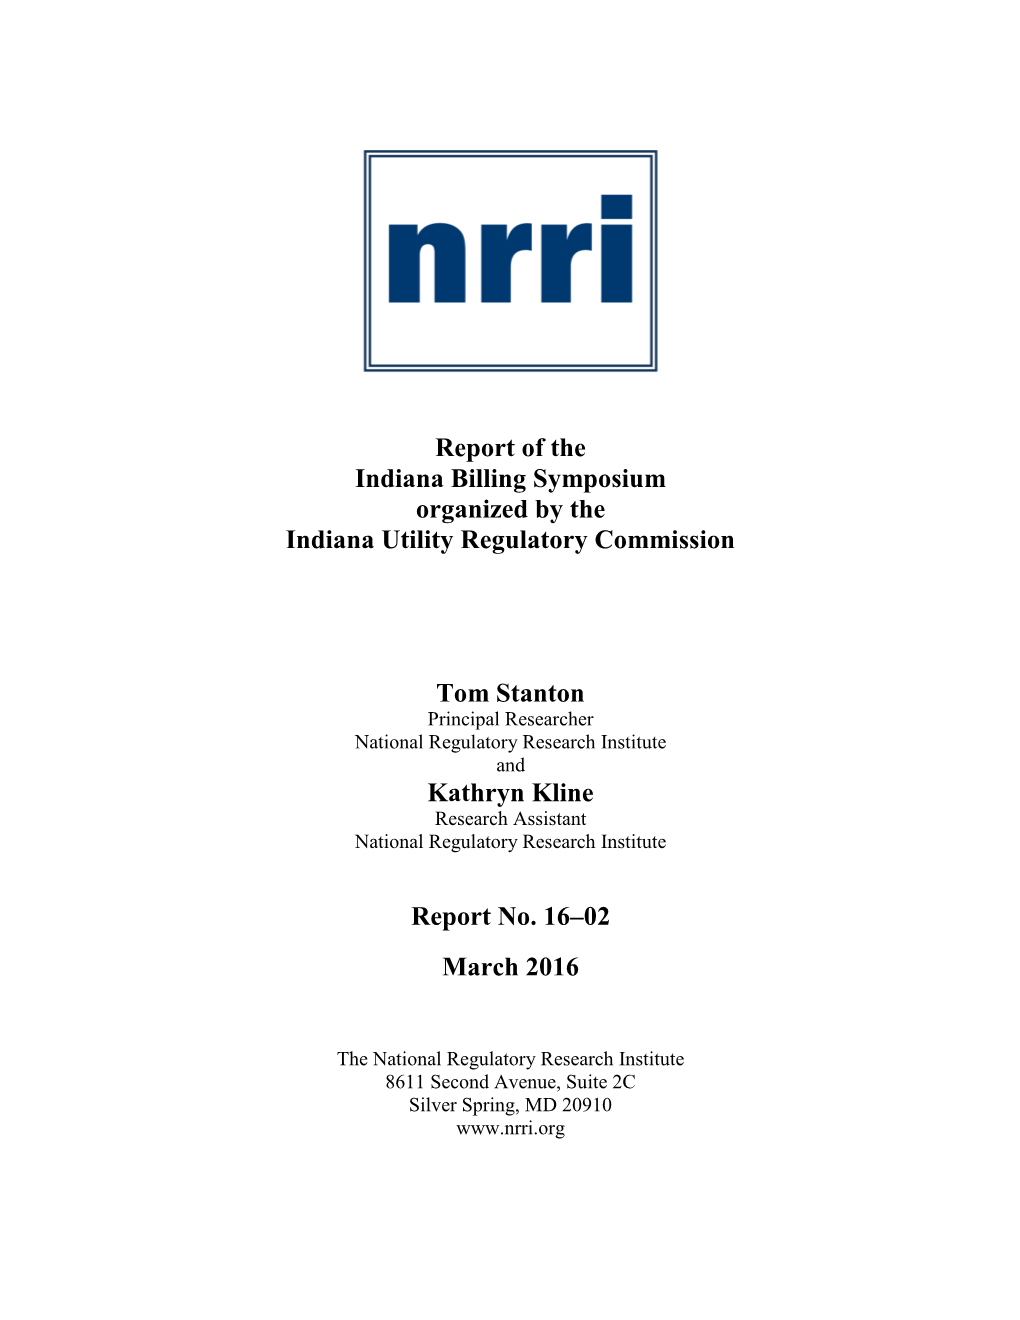 Report of the Indiana Billing Symposium Organized by the Indiana Utility Regulatory Commission